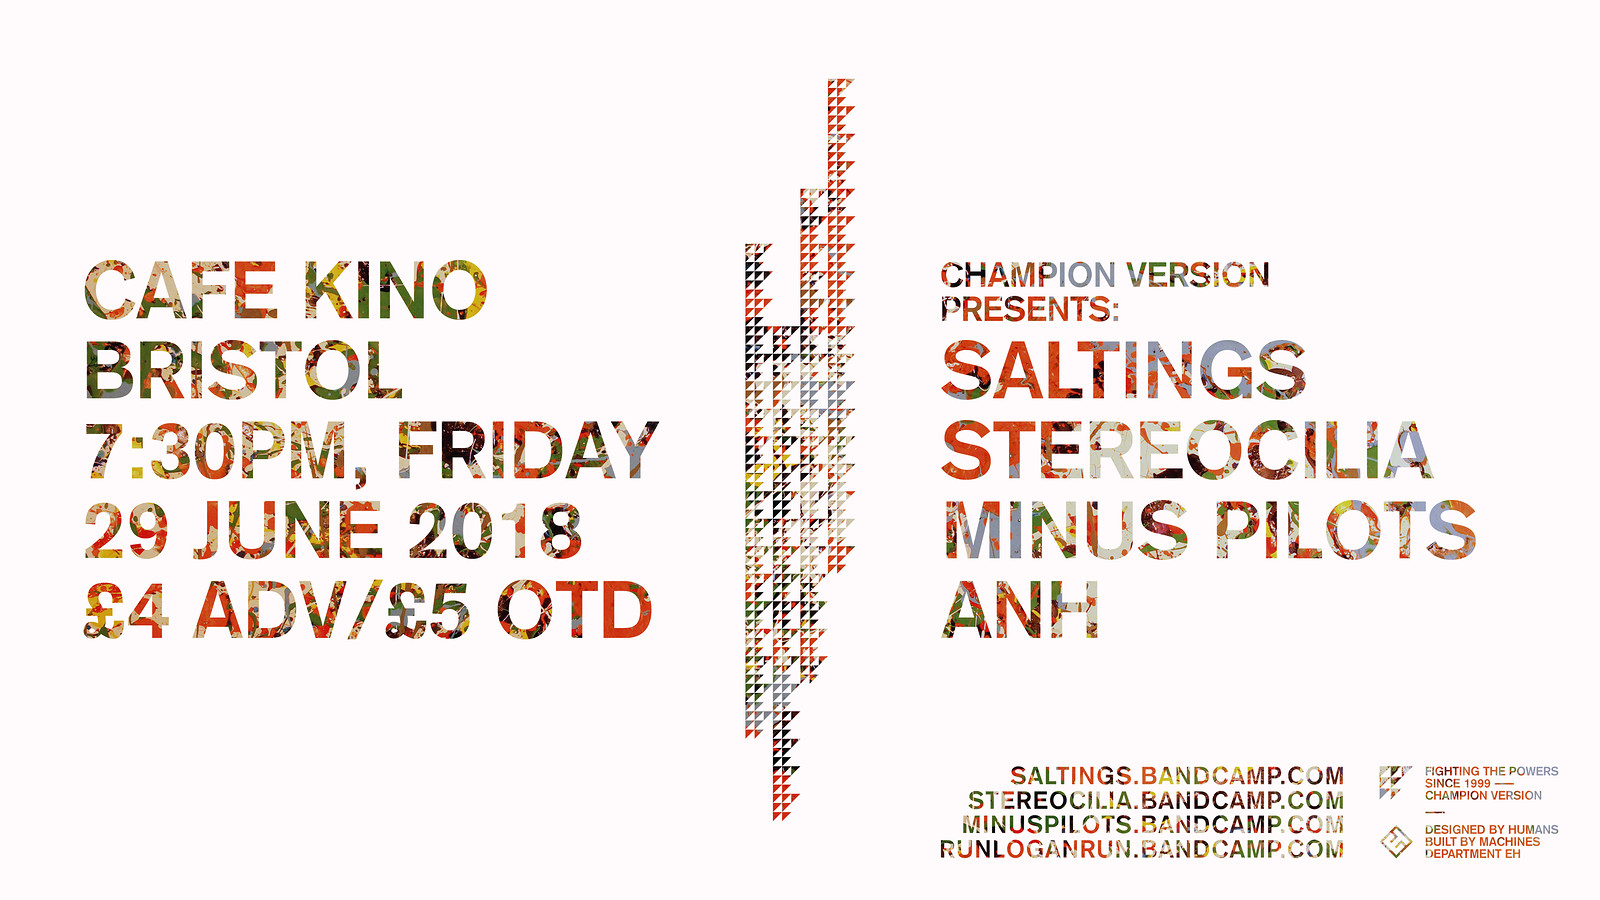 Minus Pilots / SALTINGS / Stereocilia / ANH at Cafe Kino